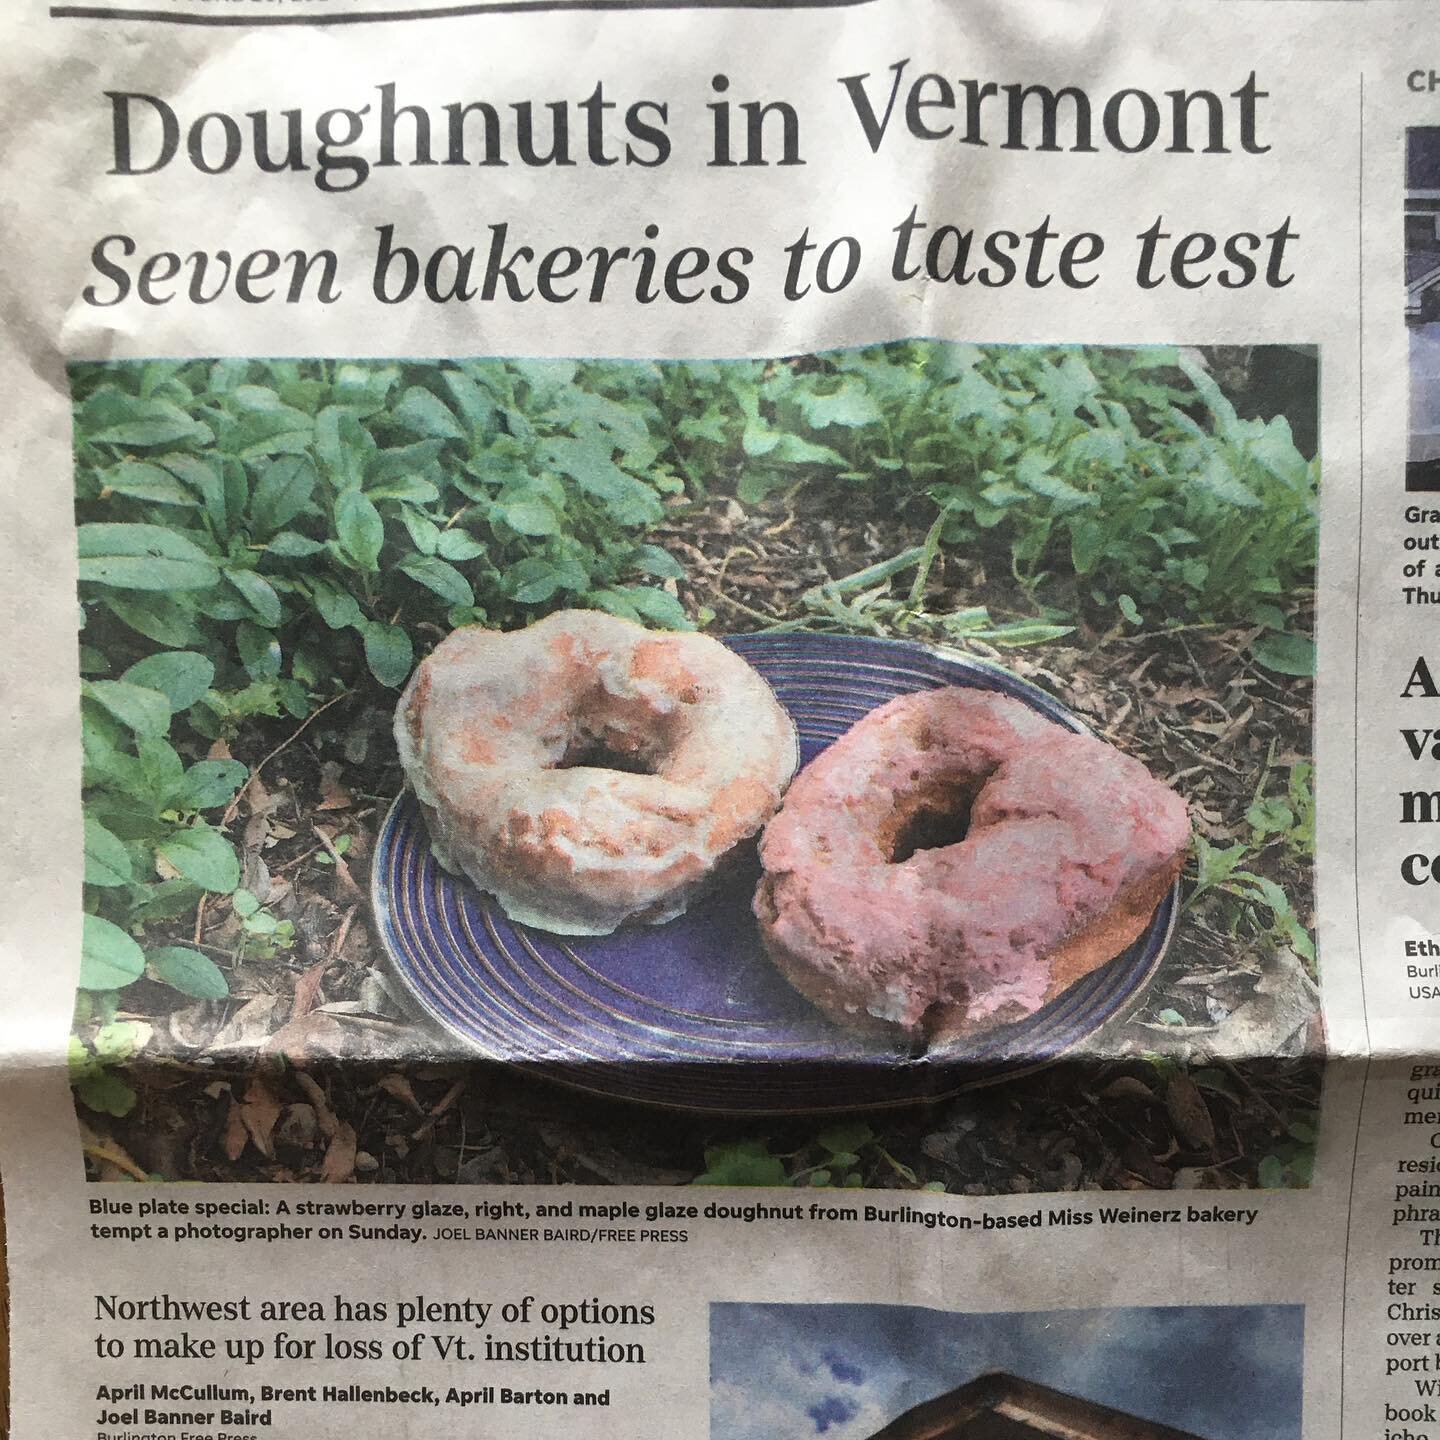 We made the paper! Thank you for the reporting @bfp_news  To answer a few of these questions: yes, they are sourdough. While I would never call a donut healthy: The dough is cane sugar free, packed with local whole grains, flax seeds &amp; maple syru